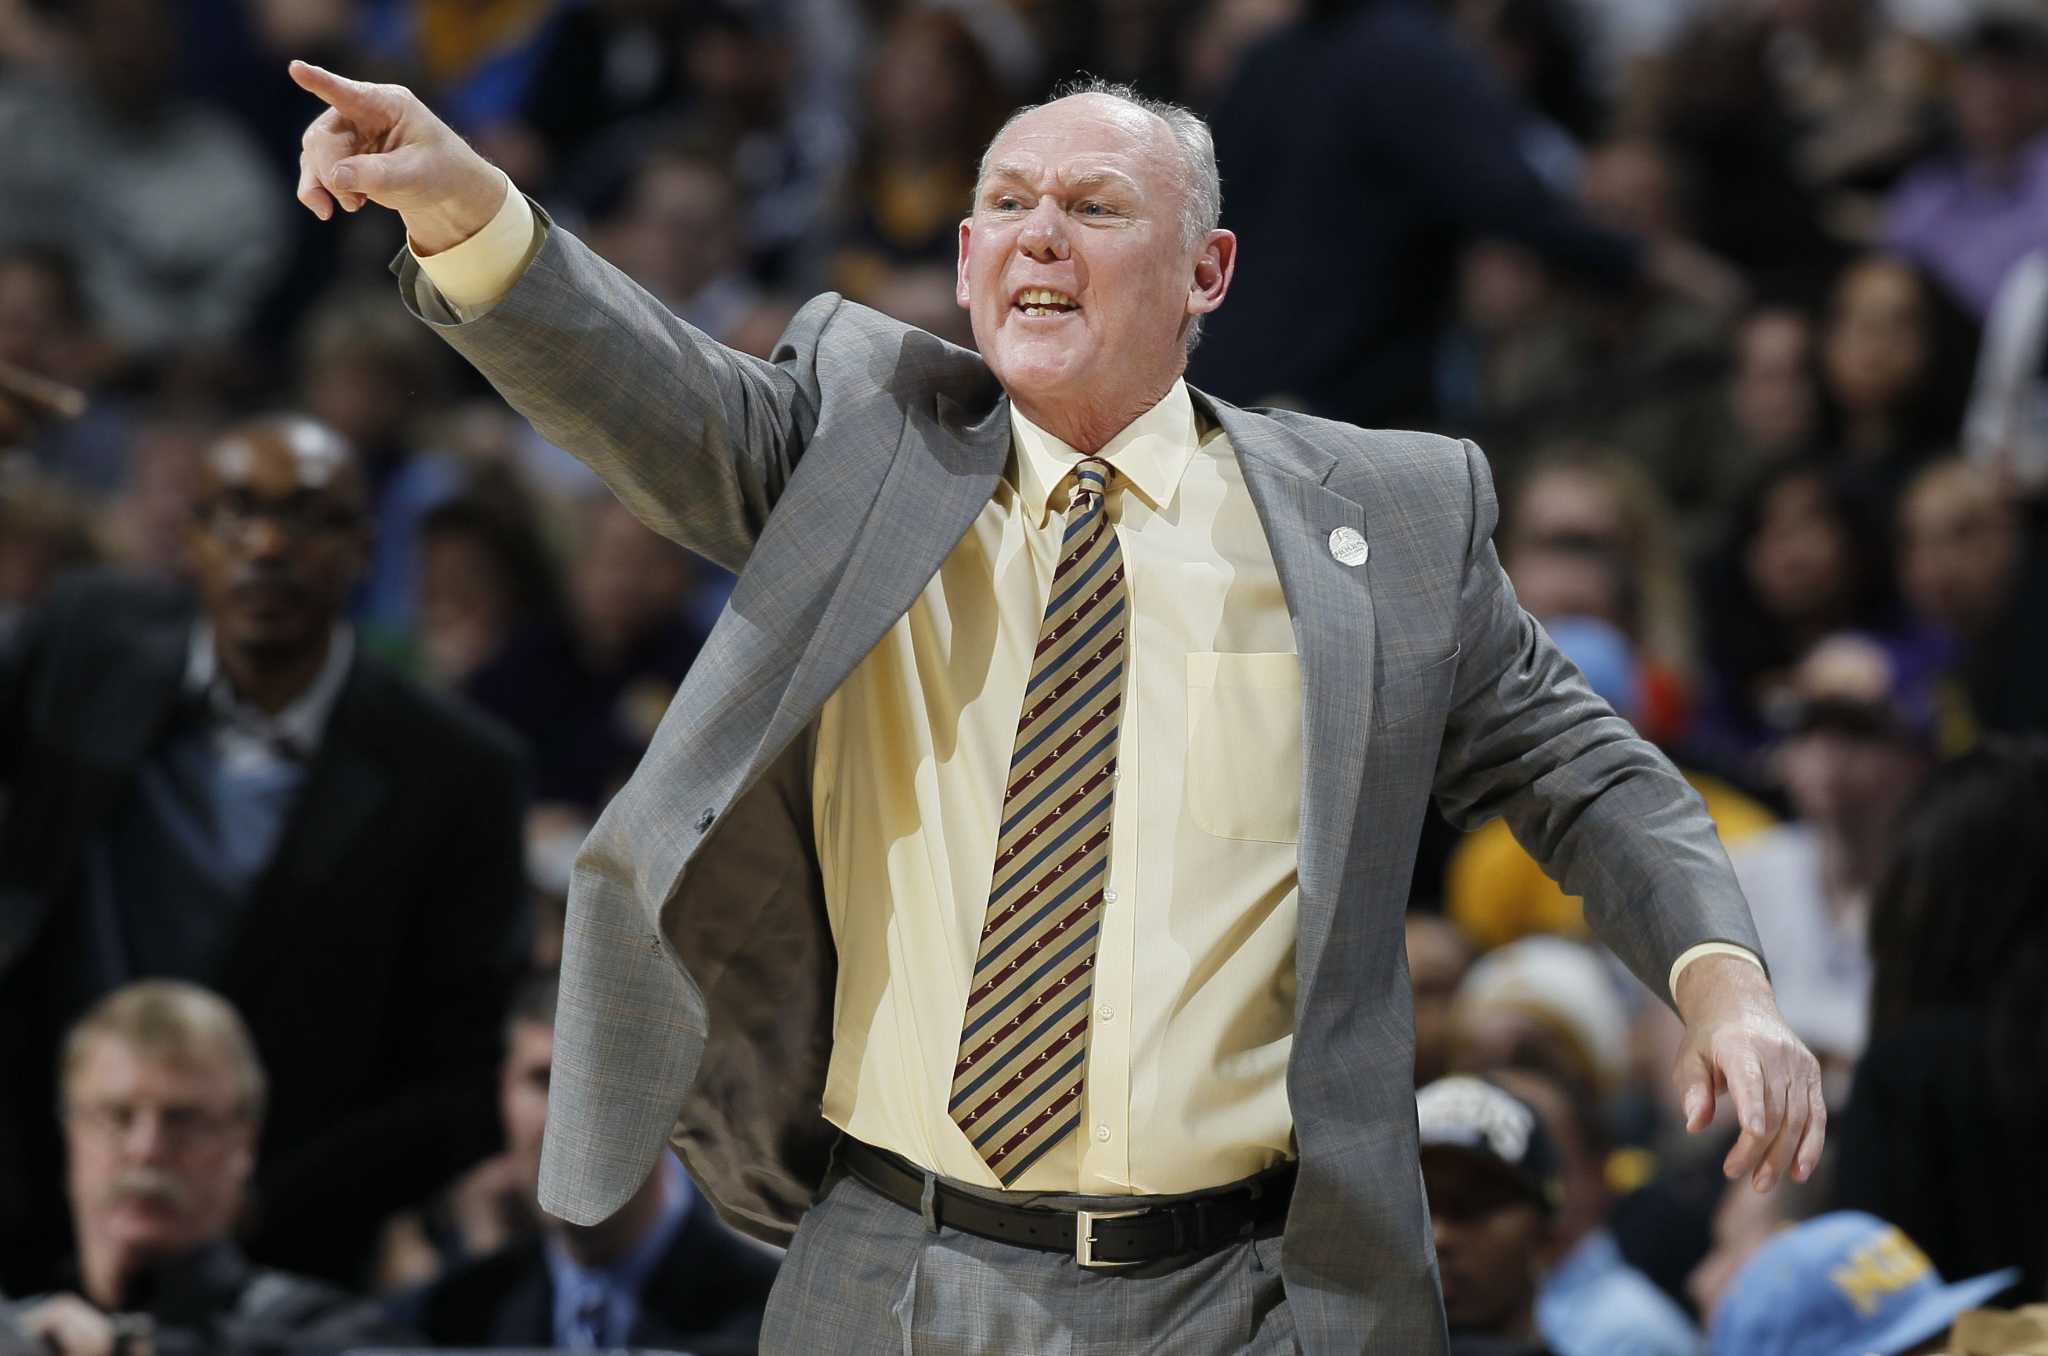 Sacramento Kings reach agreement for George Karl to become coach